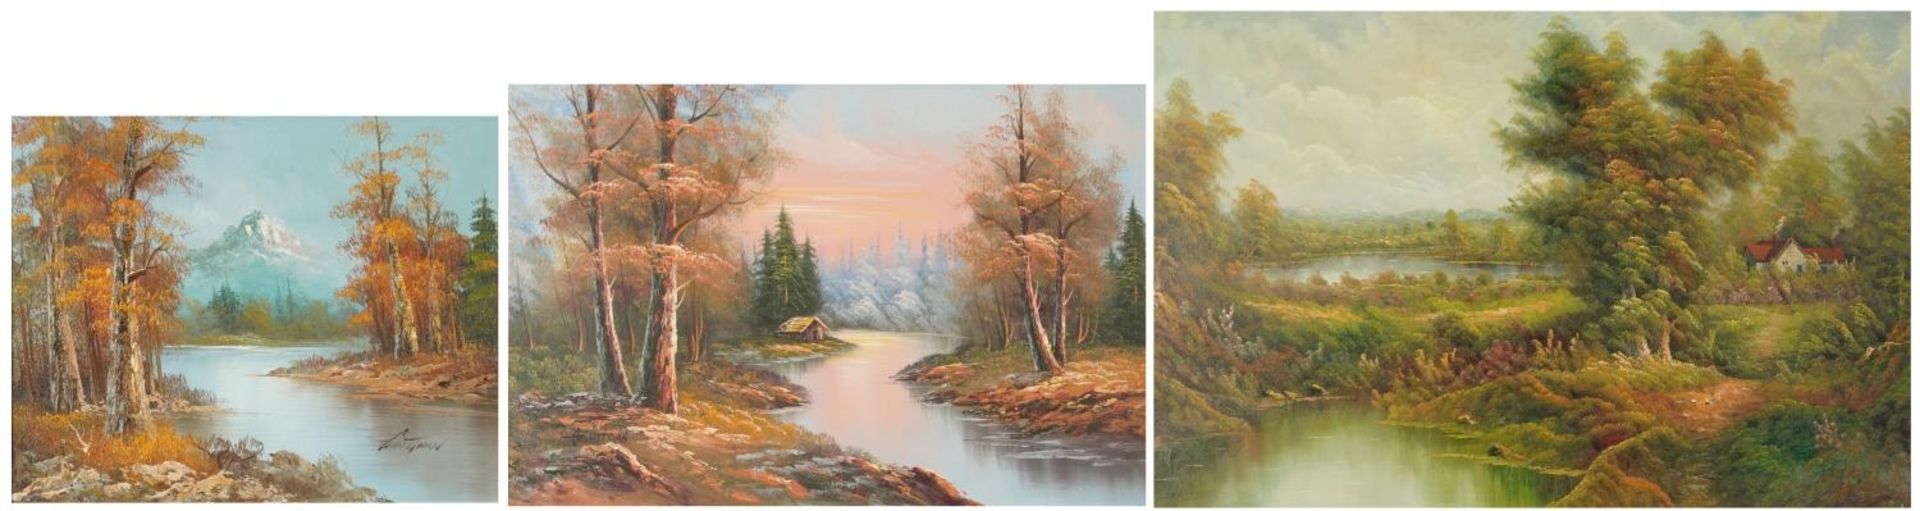 Lake scenes, three 19th century style contemporary oil on canvases/board, each mounted and framed,